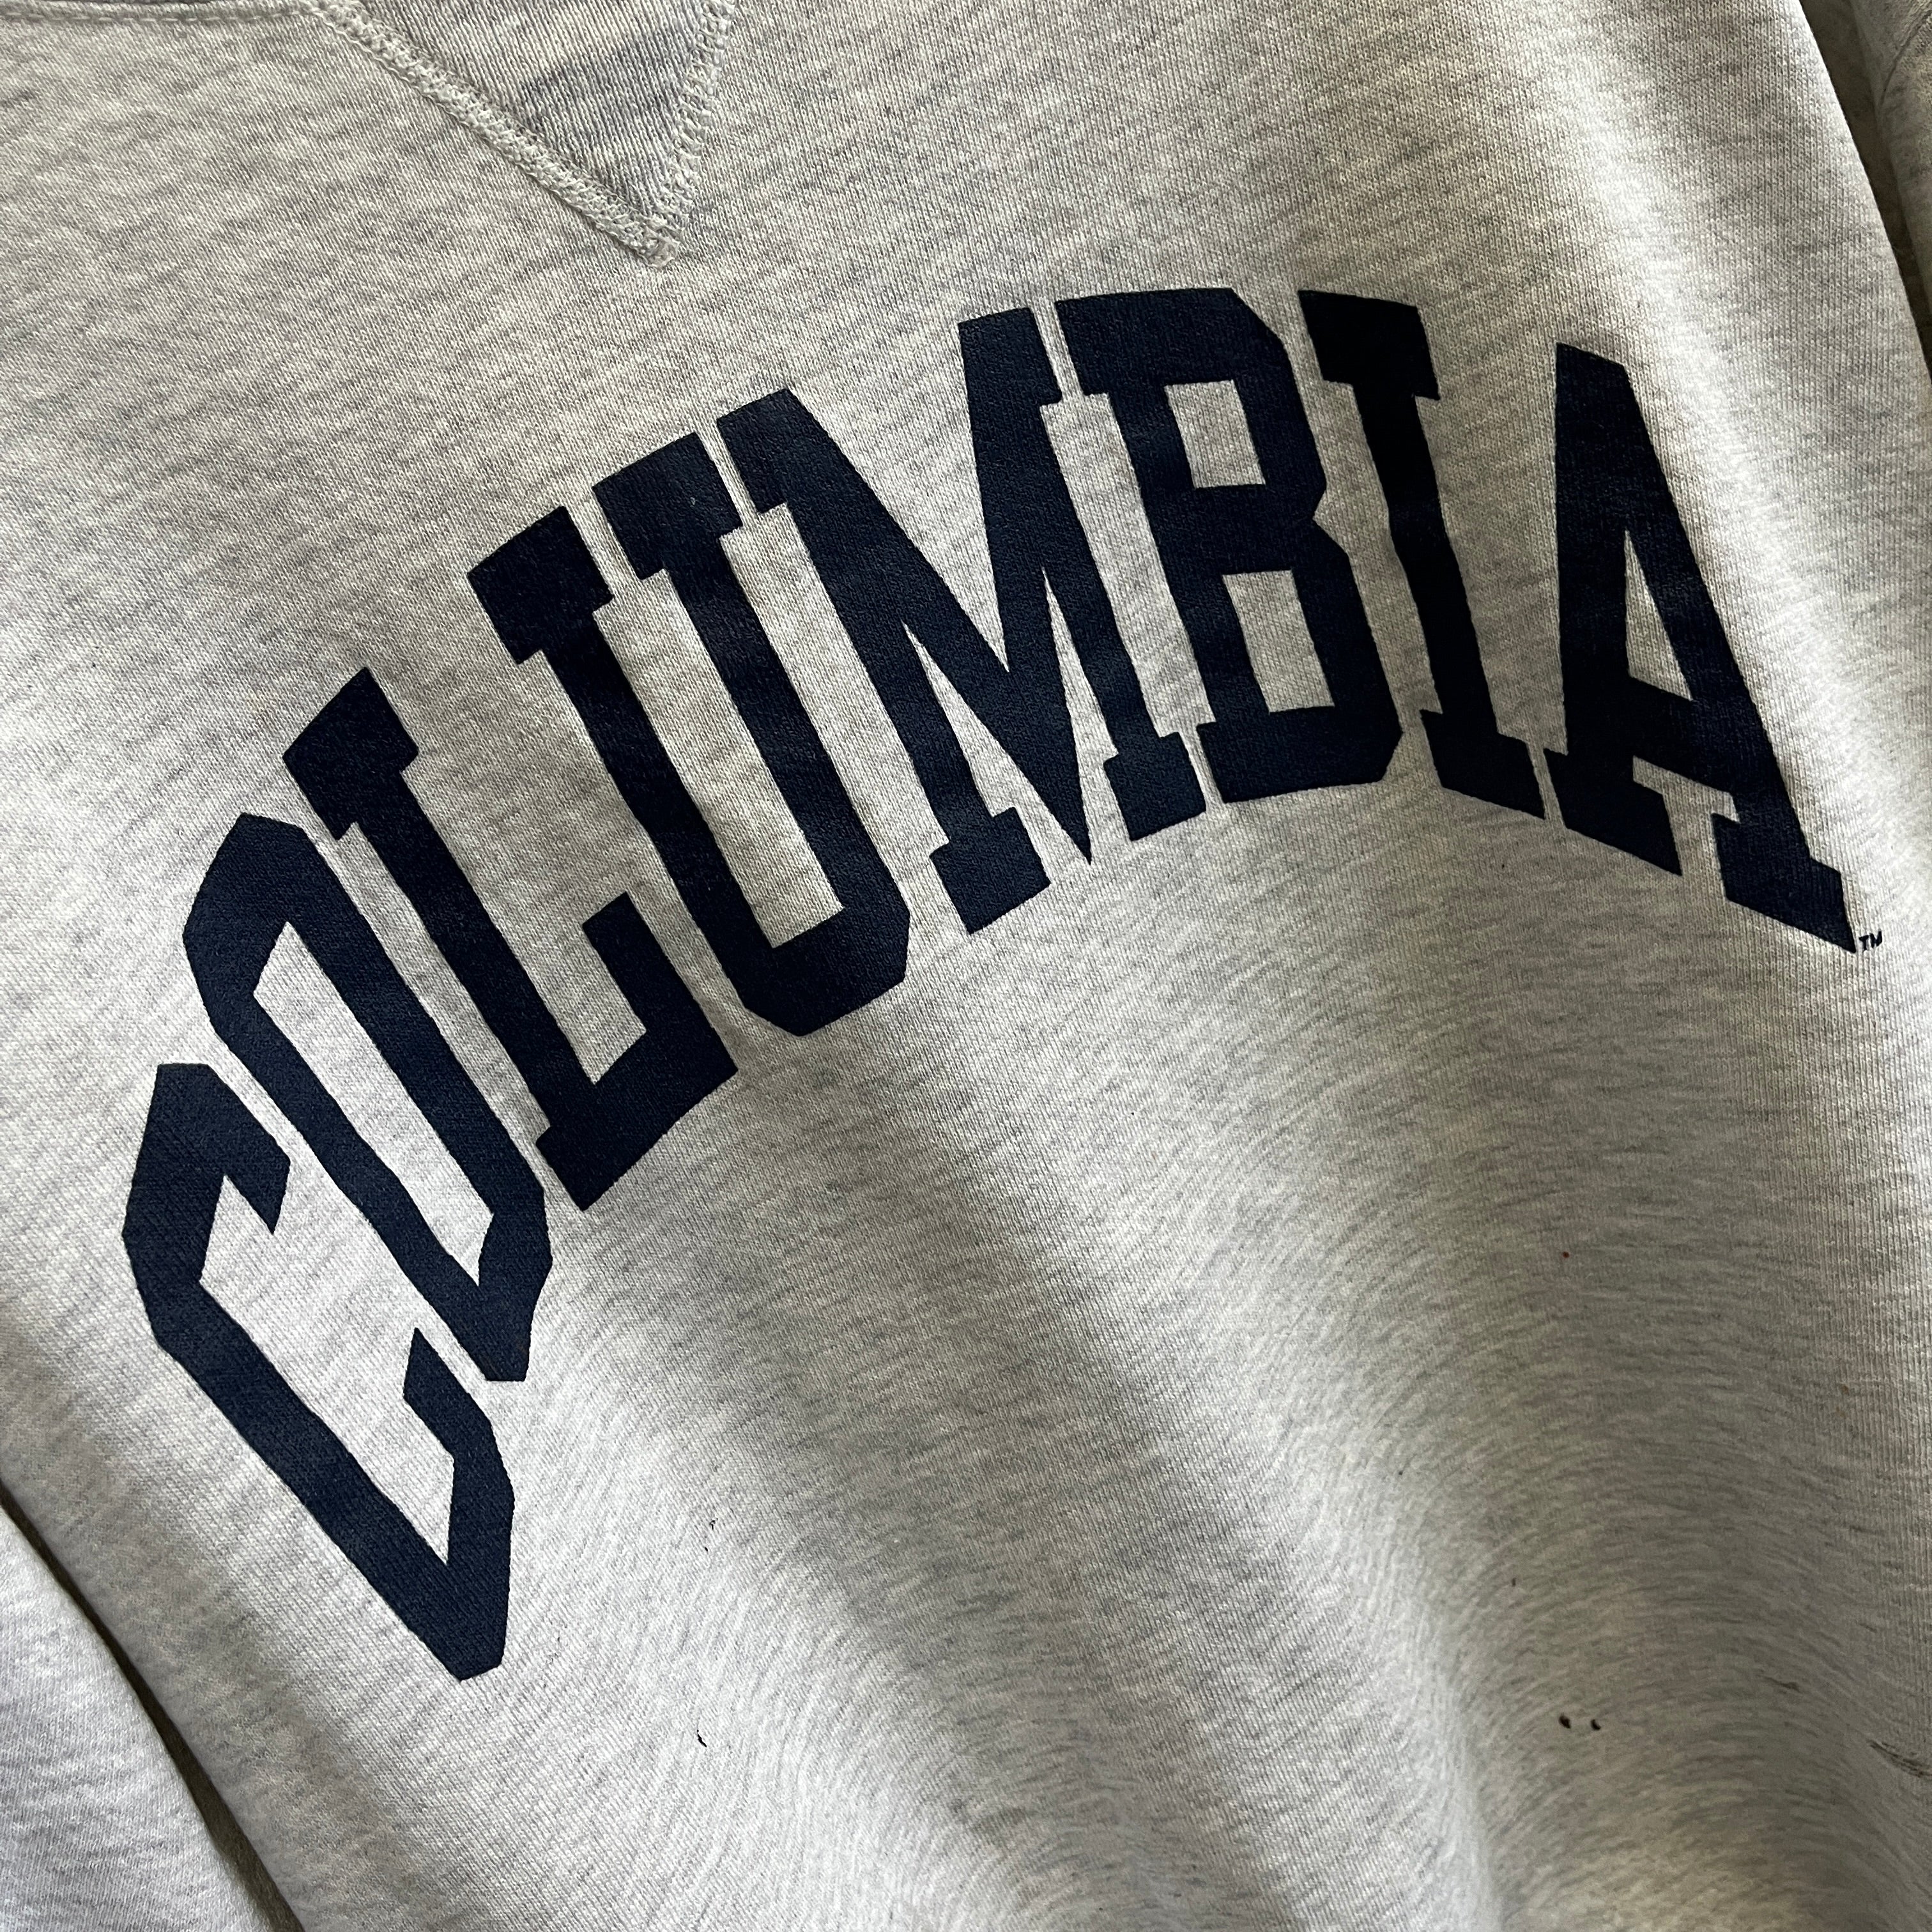 1980s Columbia Paint Stained Sweatshirt by Russell!